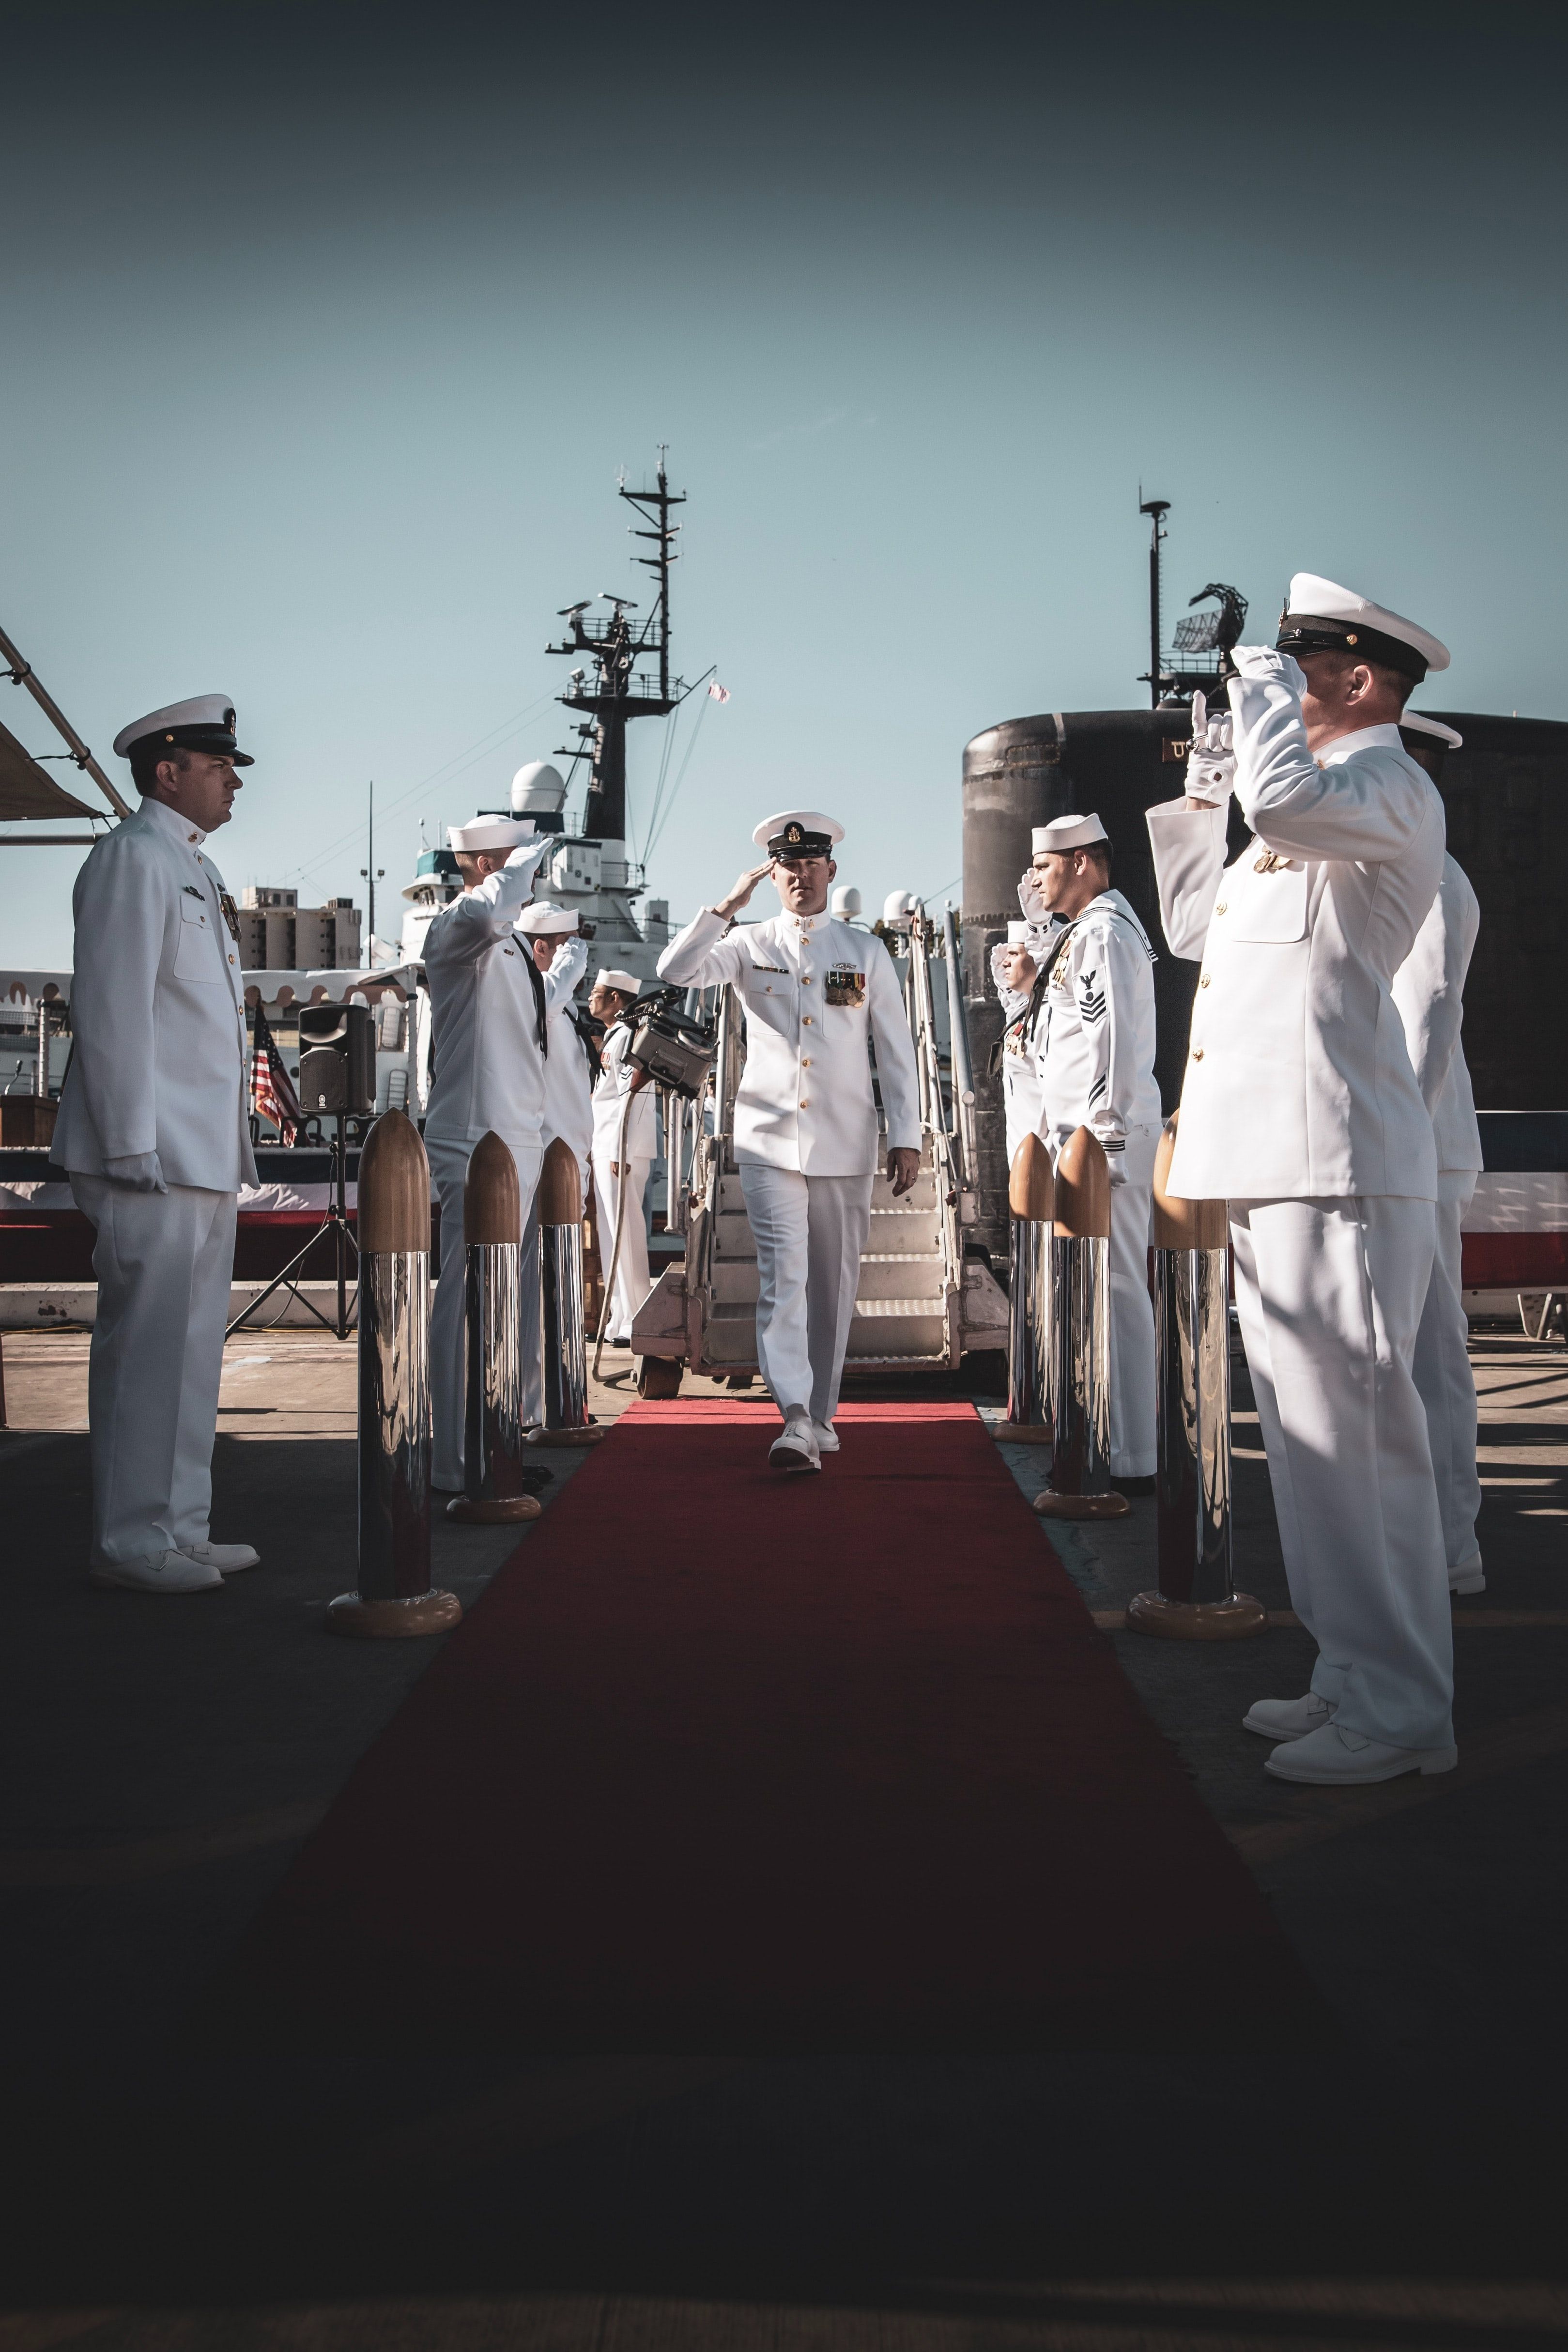 Navy Uniform Picture. Download Free Image